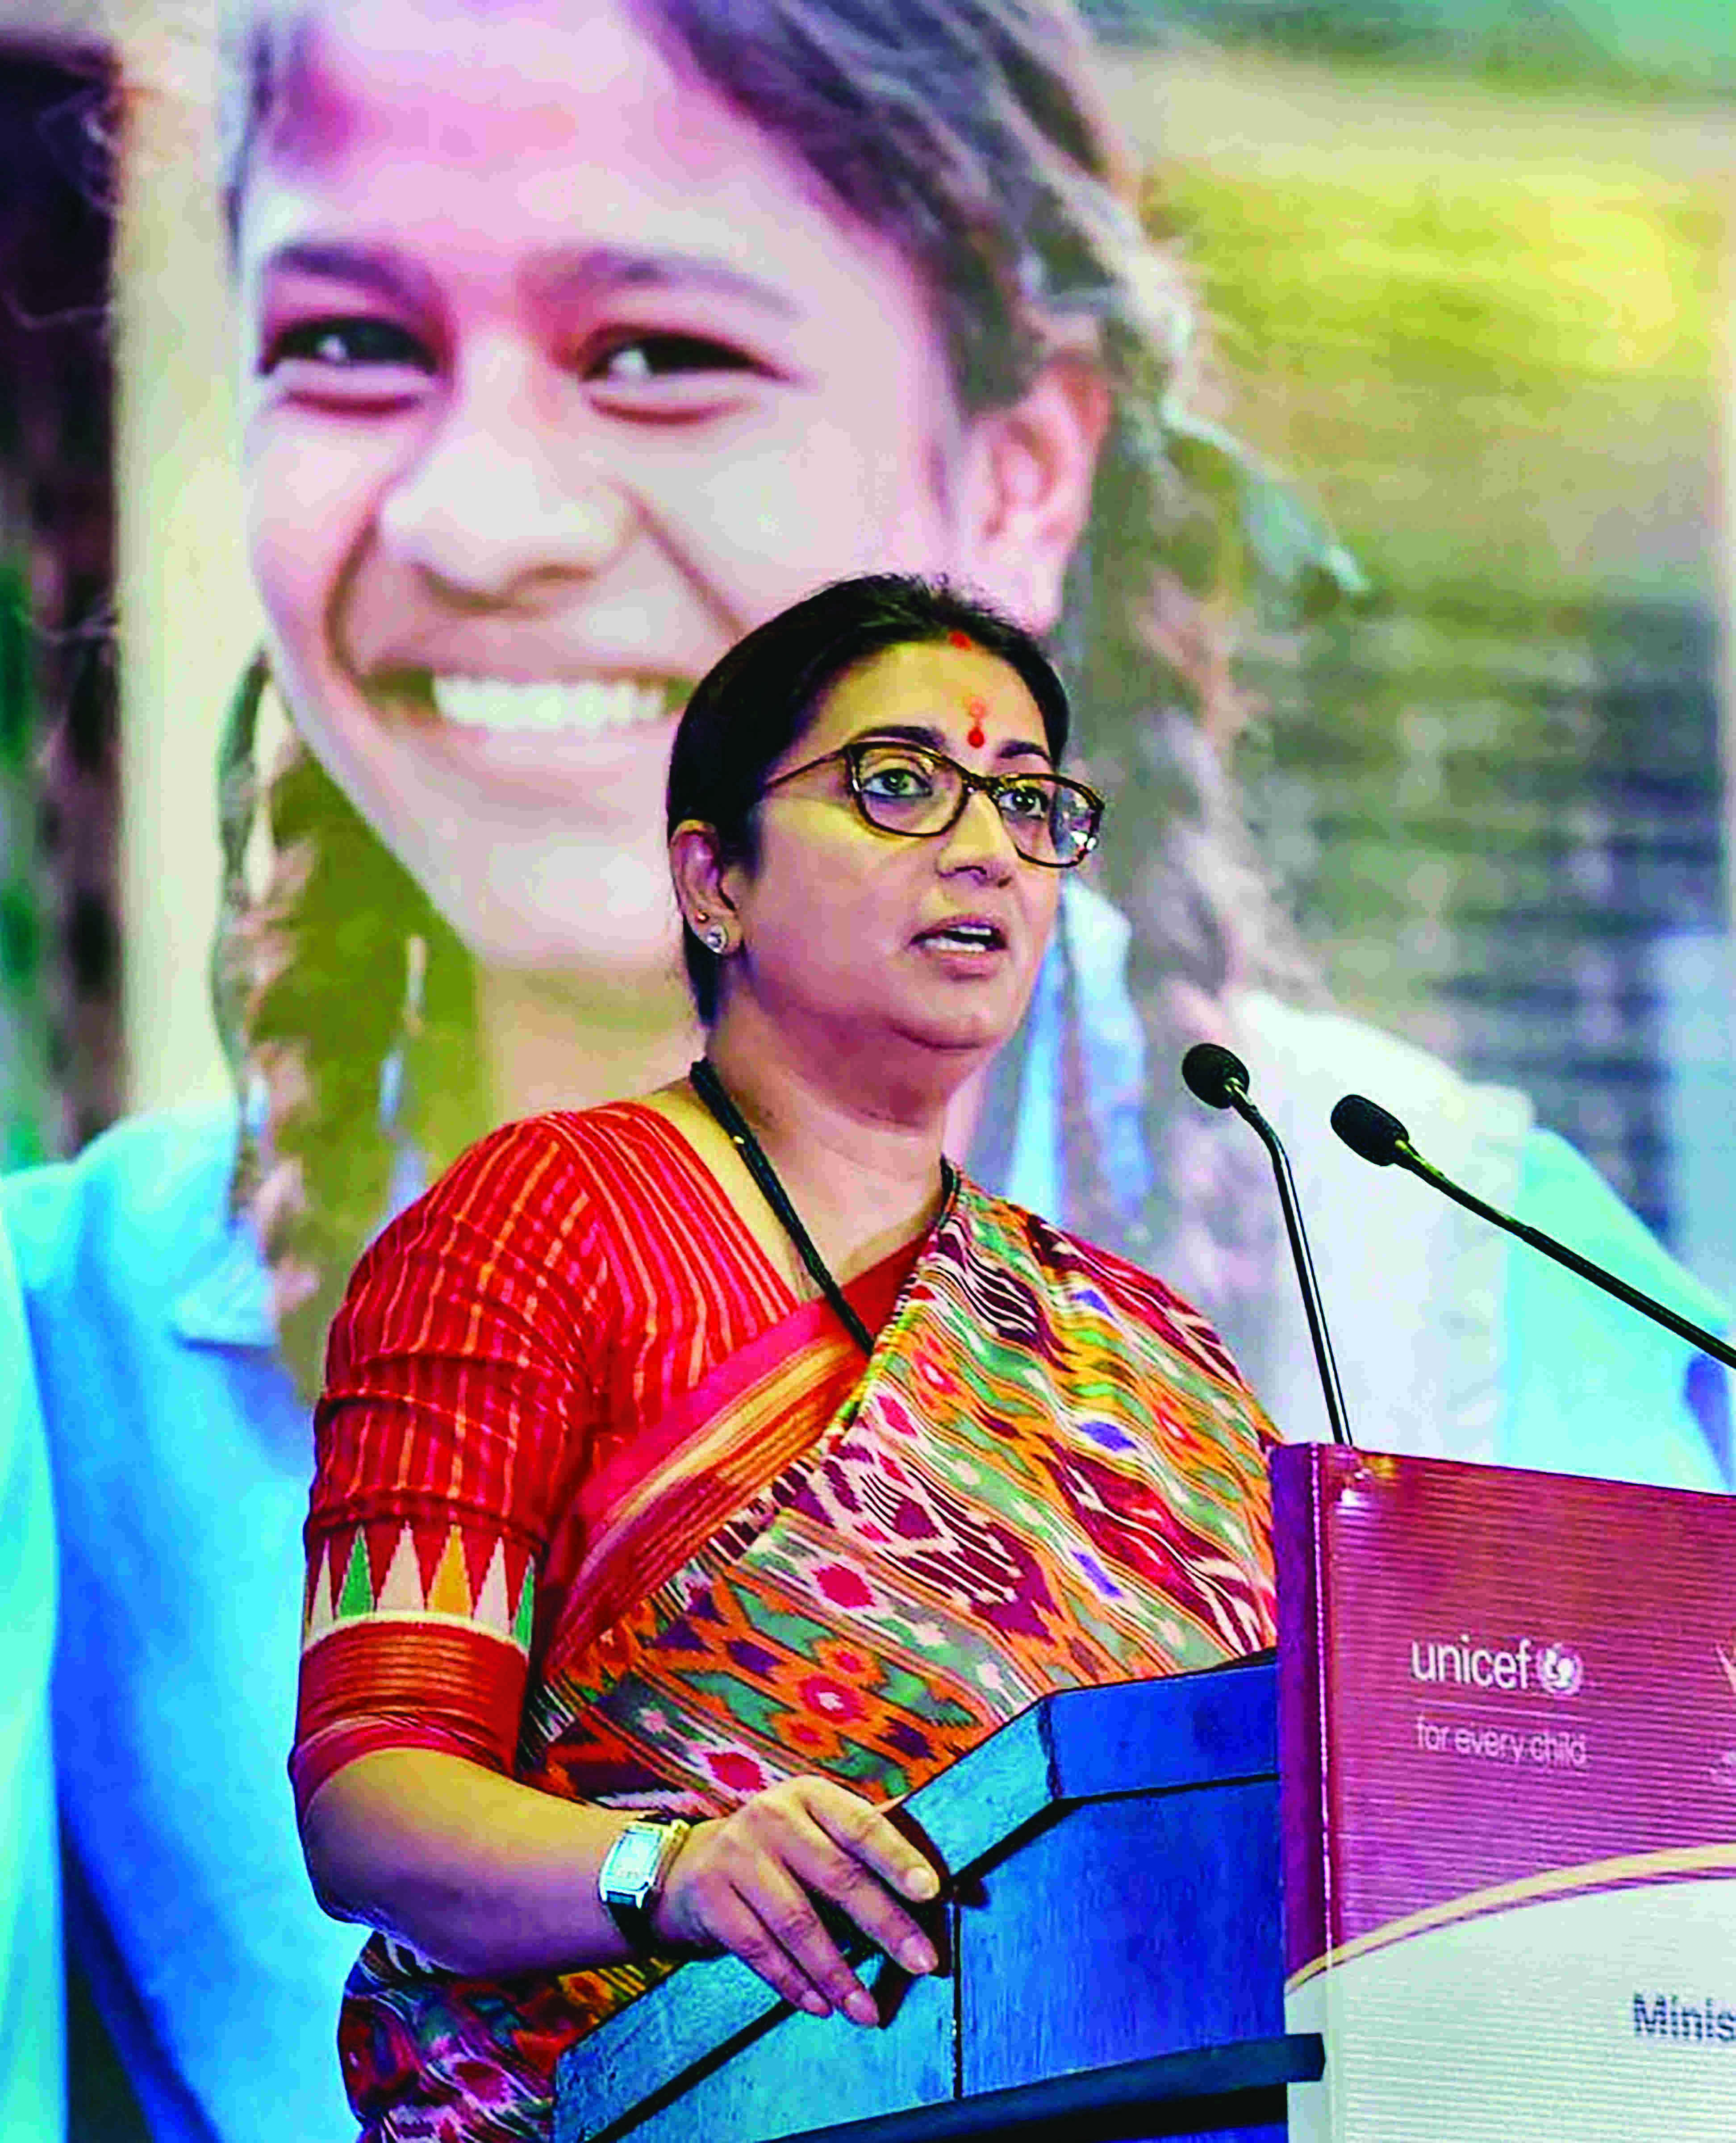 Need to ensure that women in tech not only find voice but make way for other women: Irani